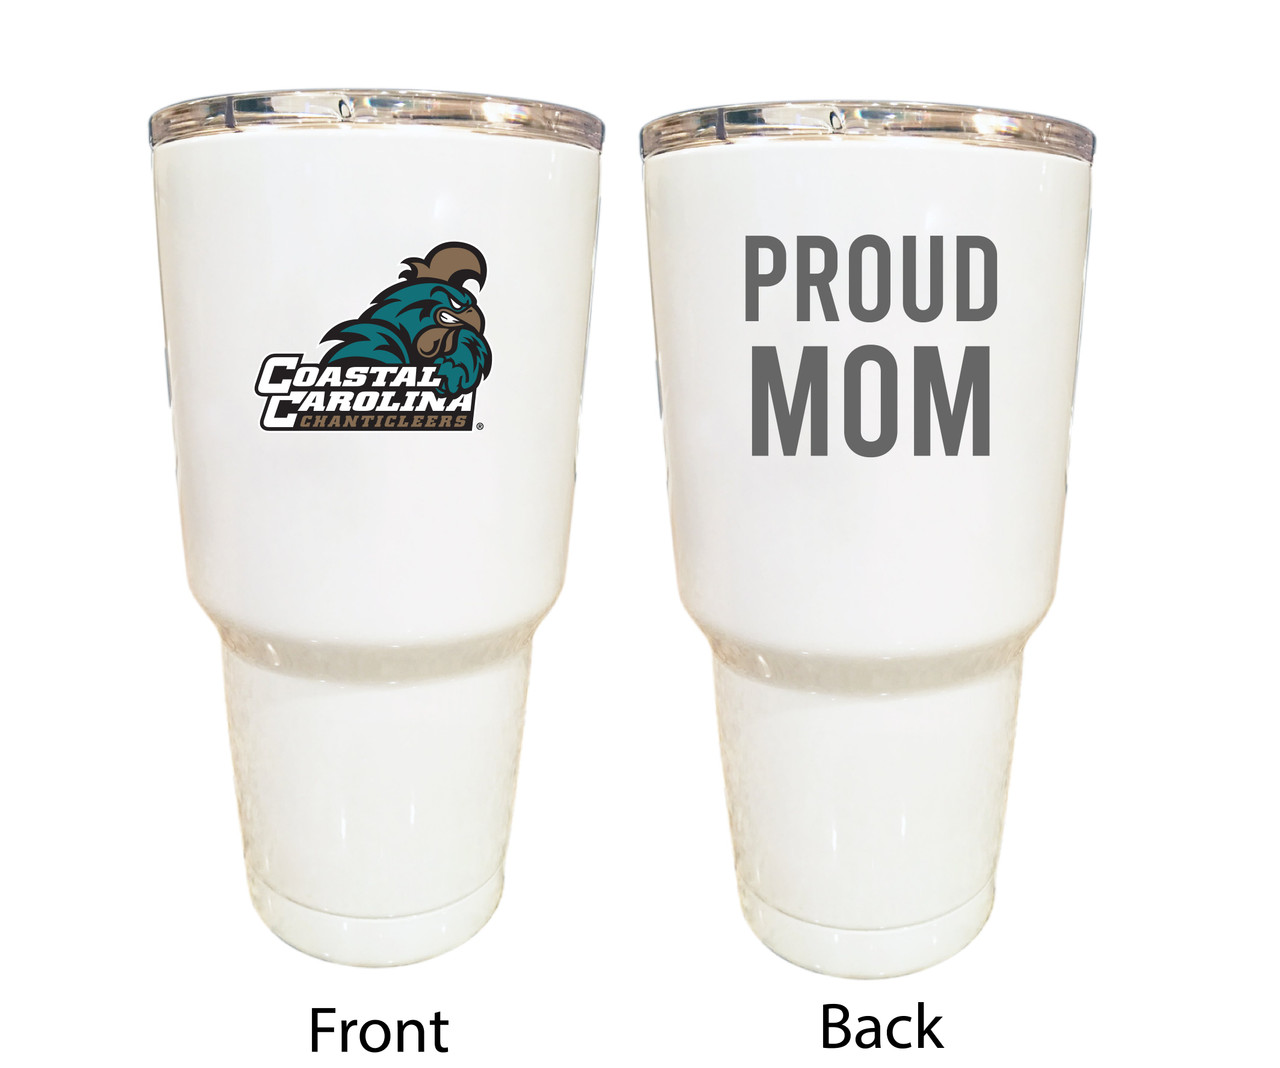 Coastal Carolina University Proud Mom 24 oz Insulated Stainless Steel Tumblers Choose Your Color.